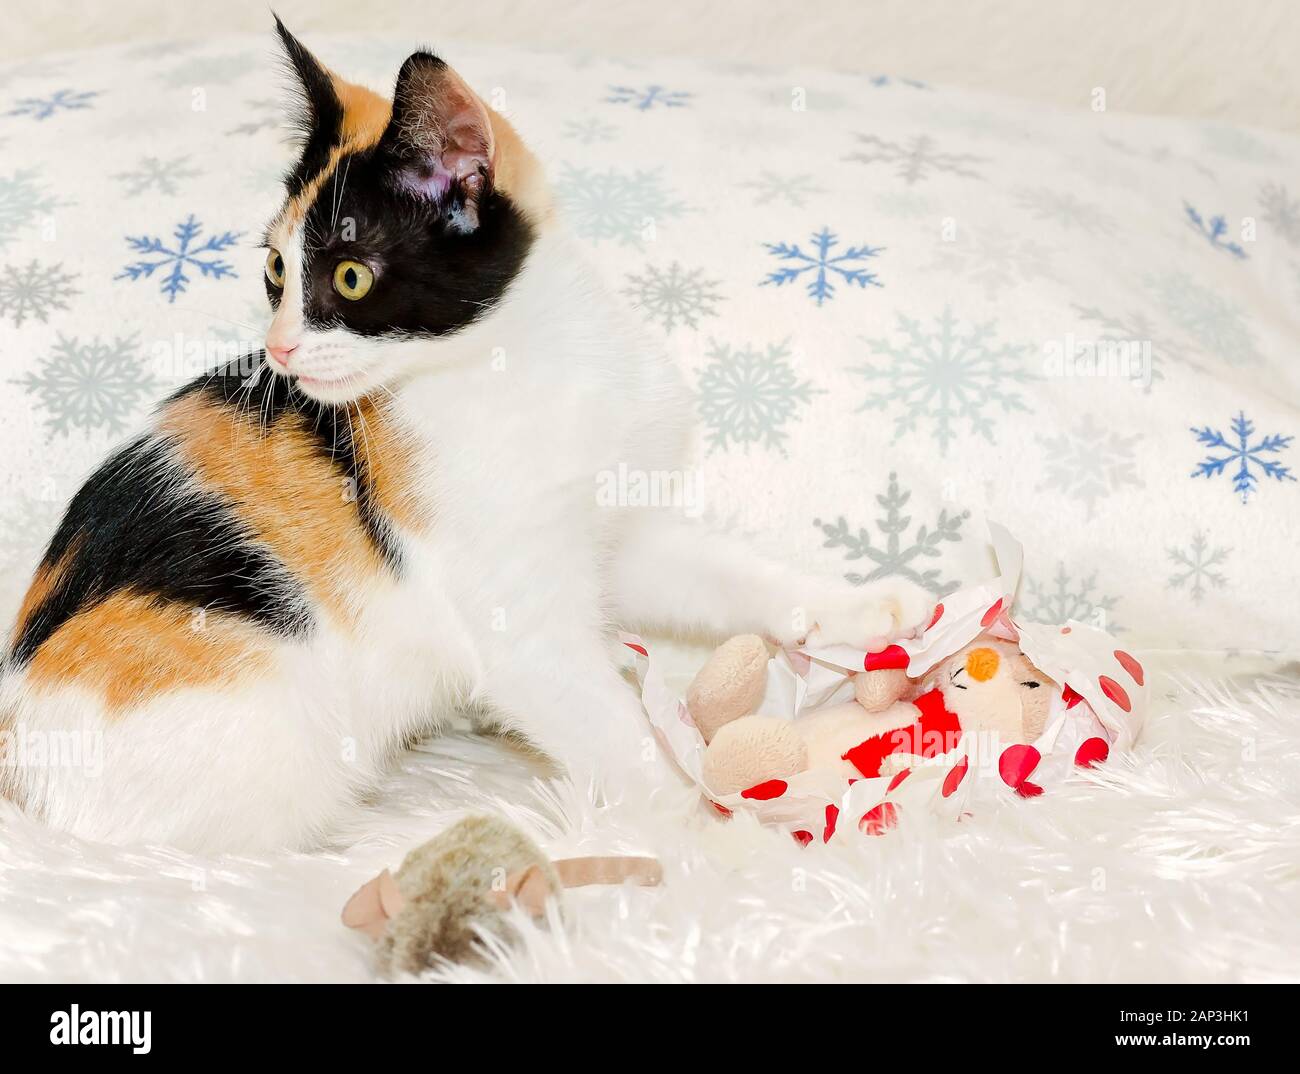 Pumpkin, a three-month-old calico kitten, unwraps a plush Christmas toy, Dec. 26, 2014, in Coden, Alabama. Stock Photo